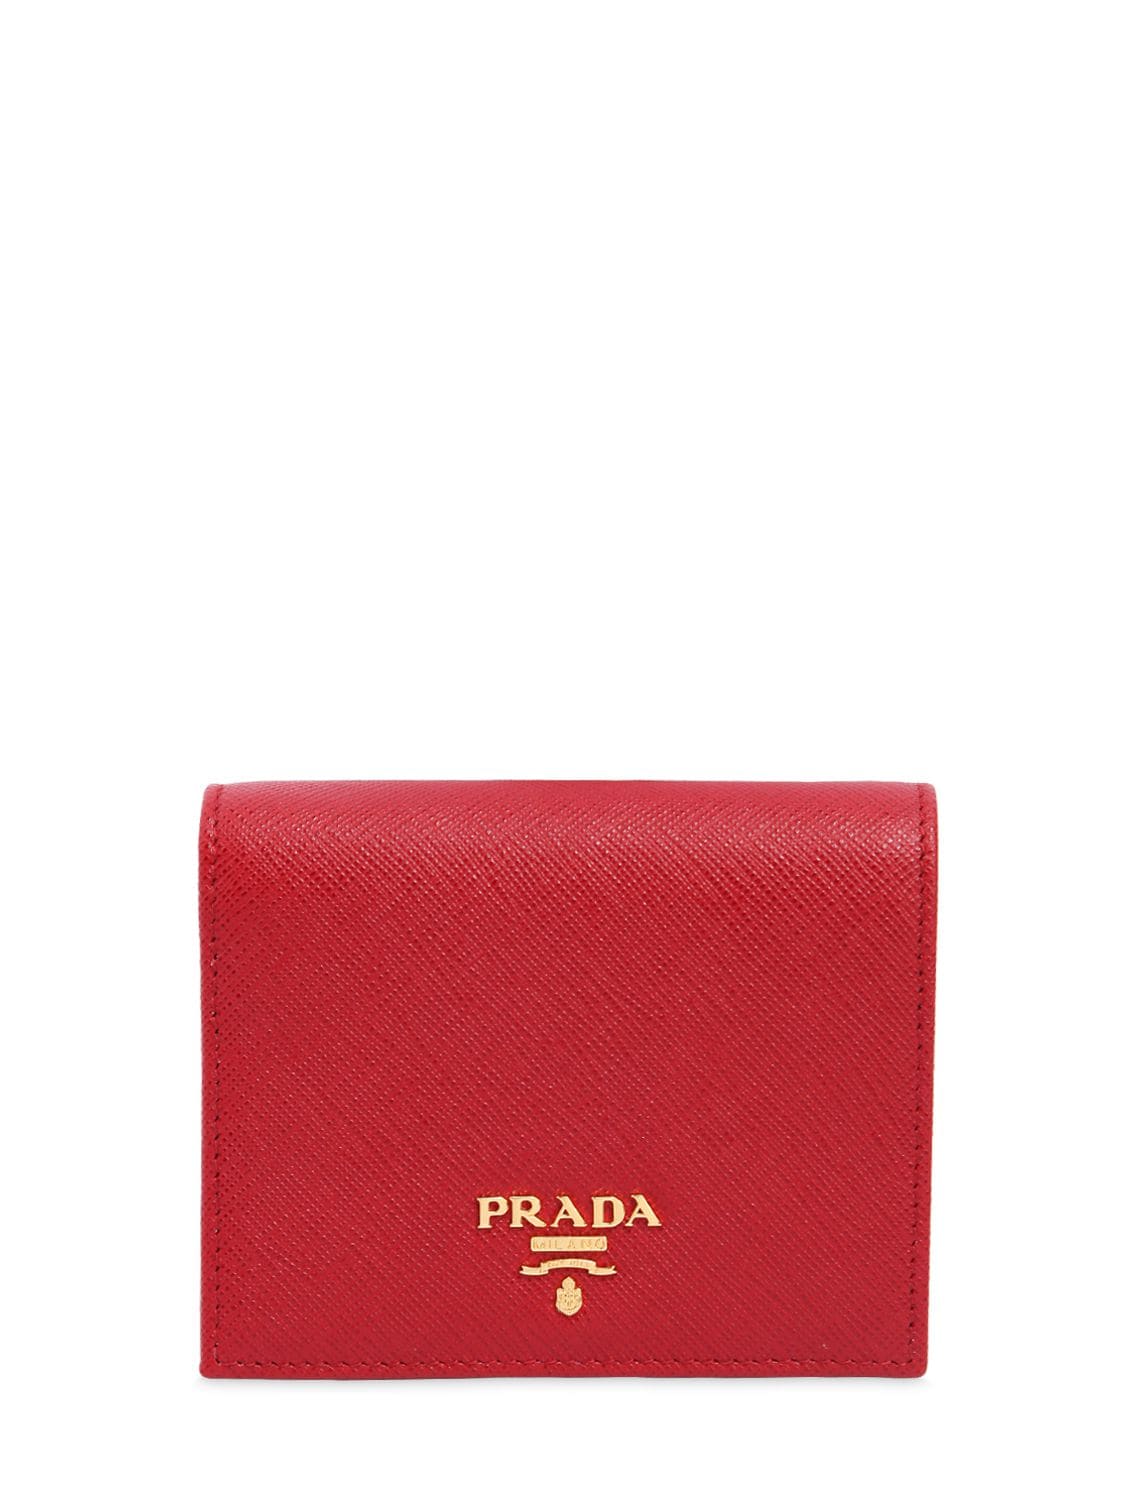 Prada Small Leather Wallet In Red